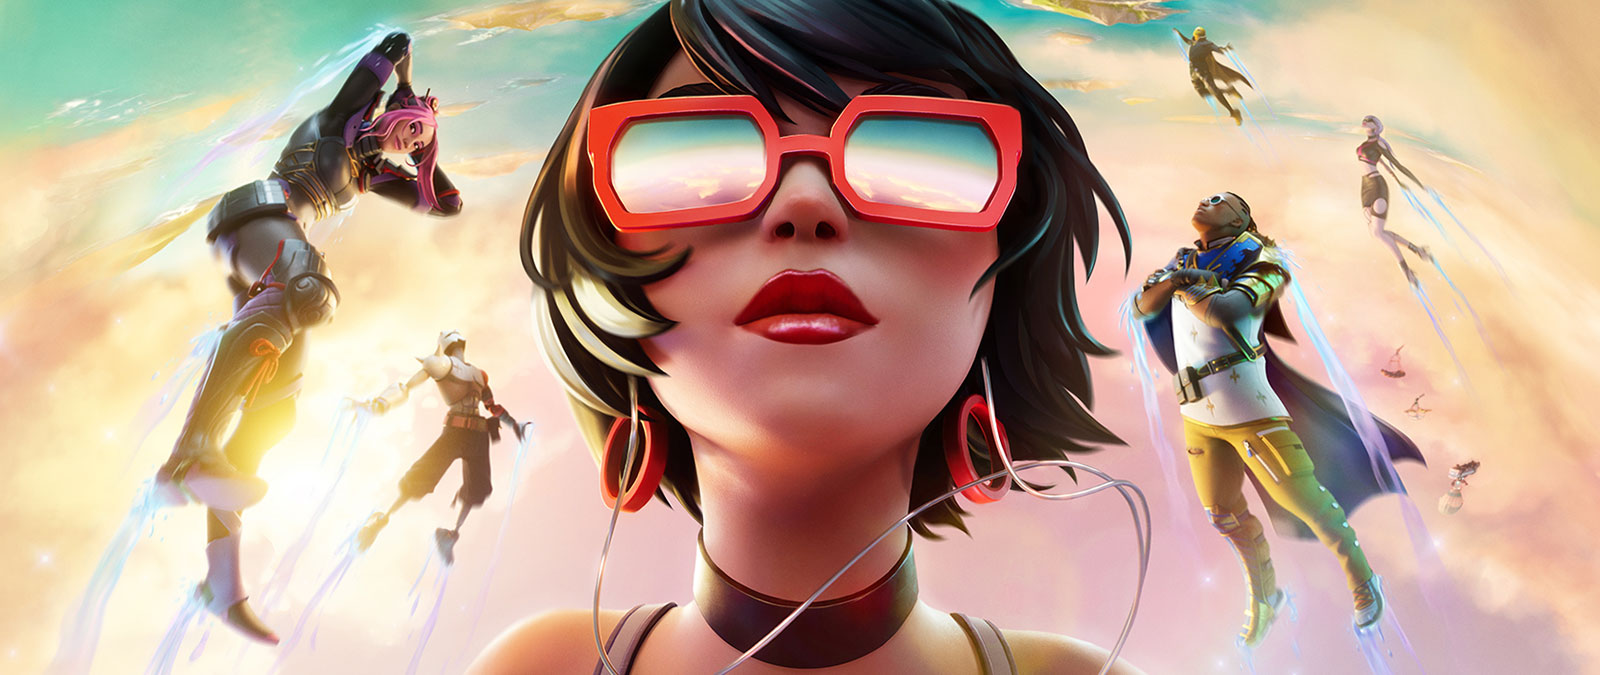 A girl in red sunglasses floats in the clouds with other characters against a pastel-coloured sky.